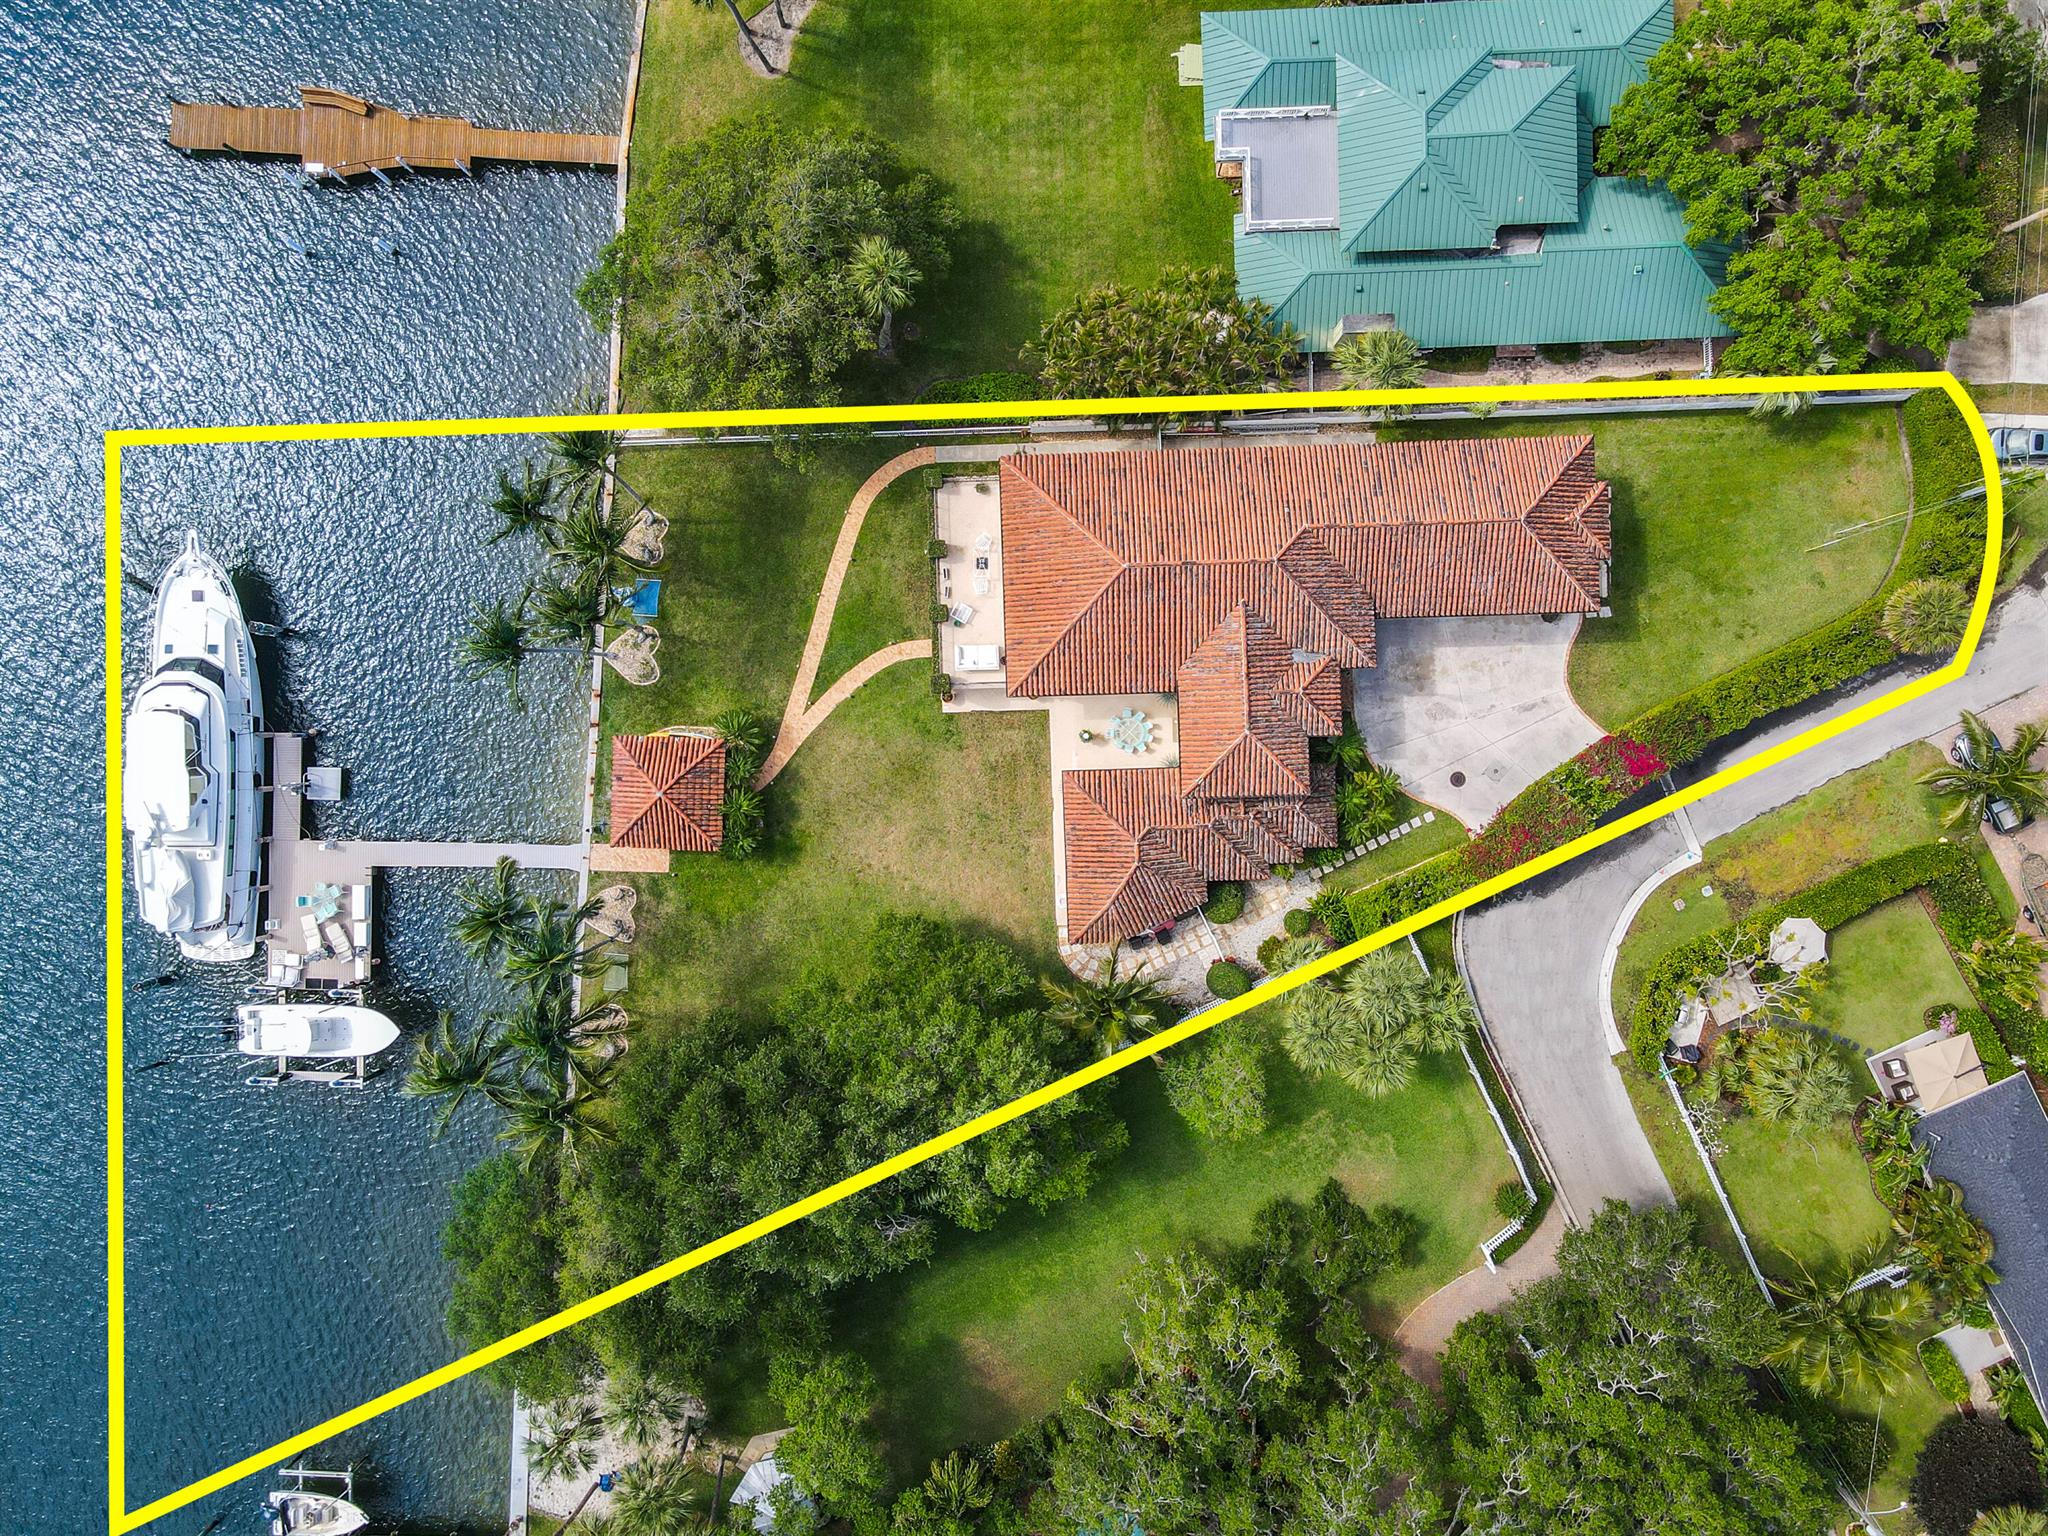 Direct Intracoastal Estate Home with expansive water views in the heart of Palm Beach Gardens. This unique property is situated on 1.4 acres of land in a no wake zone, boasts 160 ft of water frontage and can accommodate a large vessel, such as an 80-100ft yacht with no fixed bridges. Exquisite details and upgrades include: impact windows & doors, Chef's kitchen w/ top of the line appliances, granite countertops, saturnia floors, generous size bedrooms, custom closets, an upstairs loft/gym area, den, and 4 car garage. Sunlight from the east  illuminates the living and gathering spaces. Exterior of home is elegantly landscaped with plenty of covered and open air entertaining spaces. Close proximity to restaurants,shopping,beaches,highly desirable schools & I-95. A True Boater's Dream!